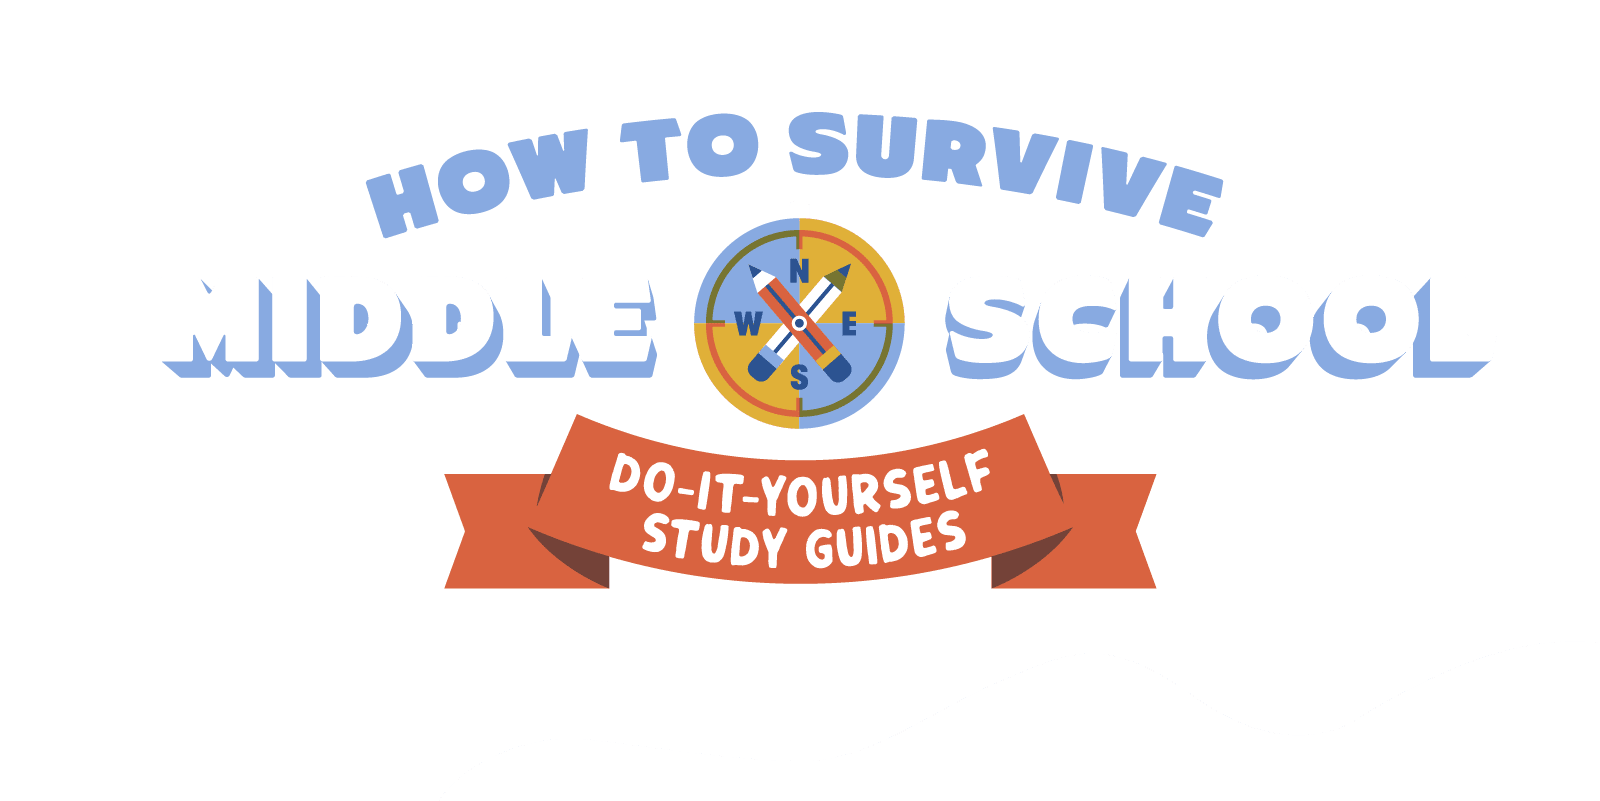 How to survive middle school do-it-yourself study guides